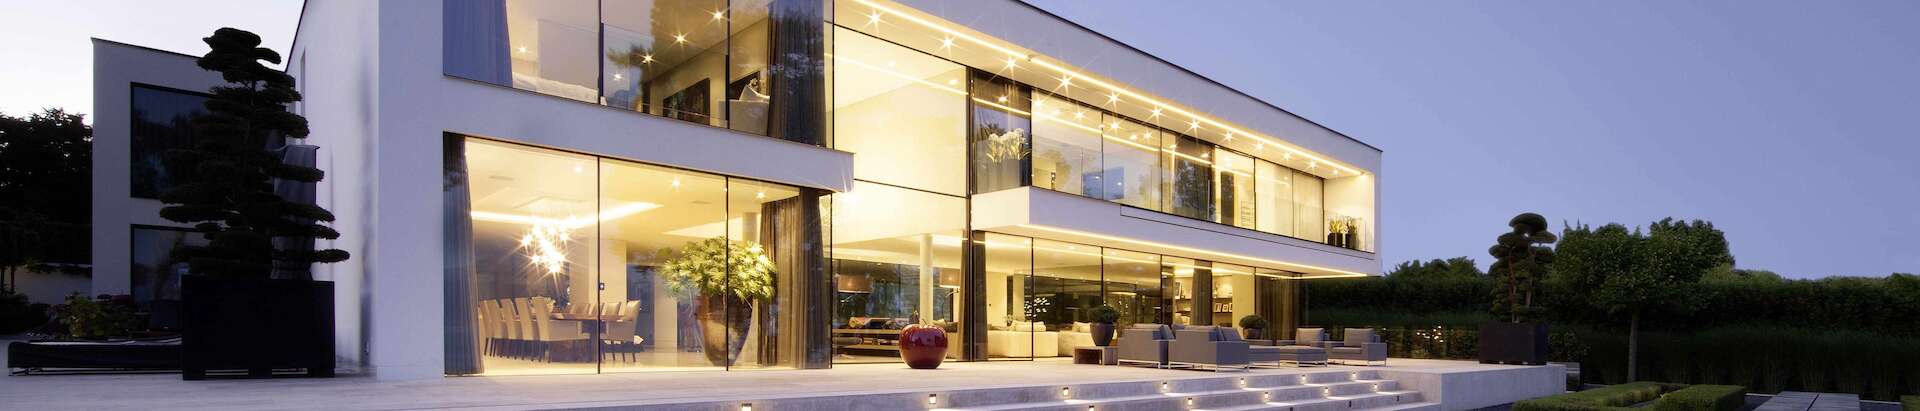 Modern villa with extremely secure sliding windows